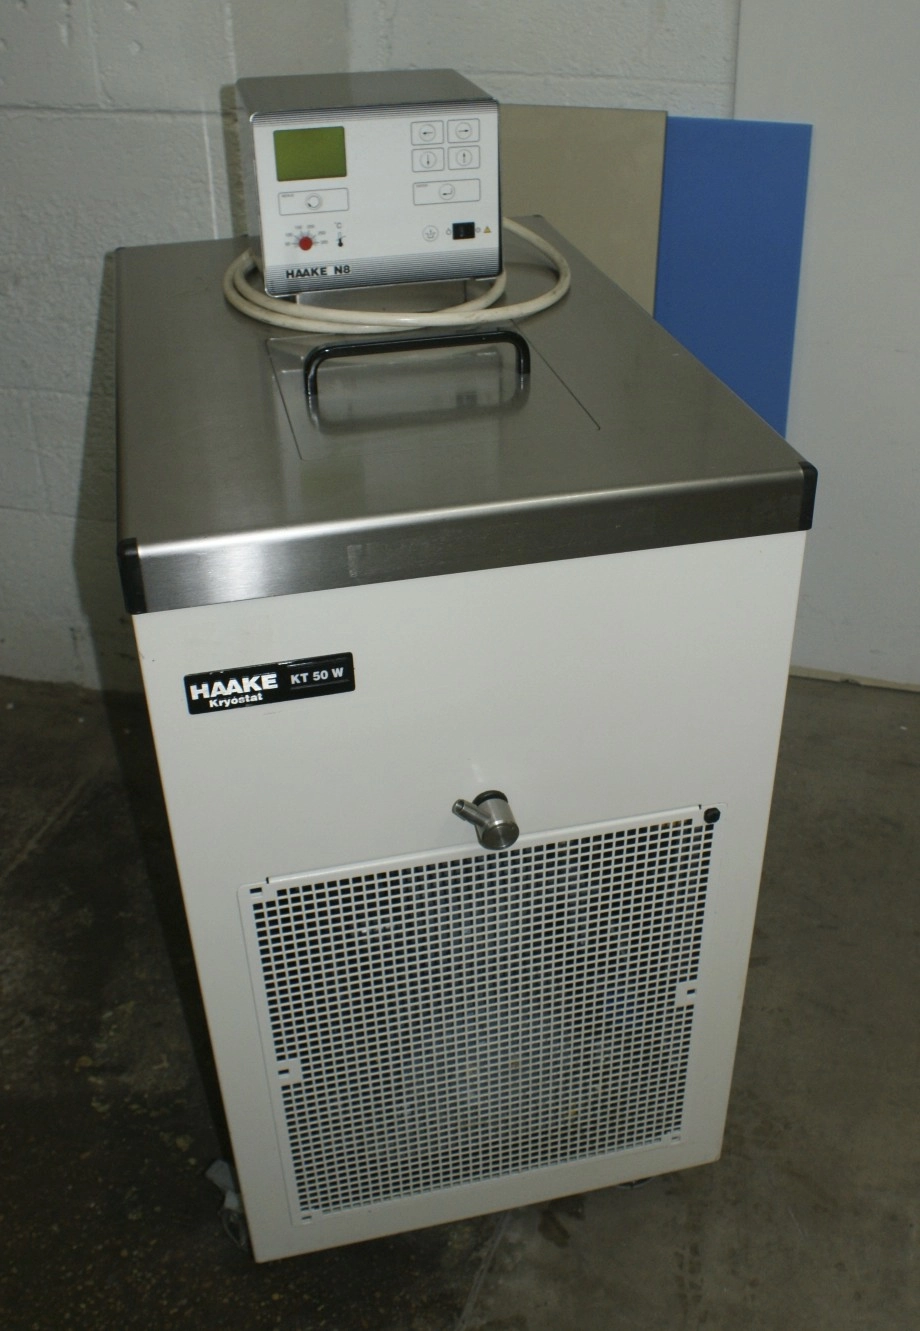 Haake Kryostat N8-KT50W Thermo Haake Refrigerated Circulator Low Temperature Thermo Haake Cryostat N8-KT50W  large capacity R